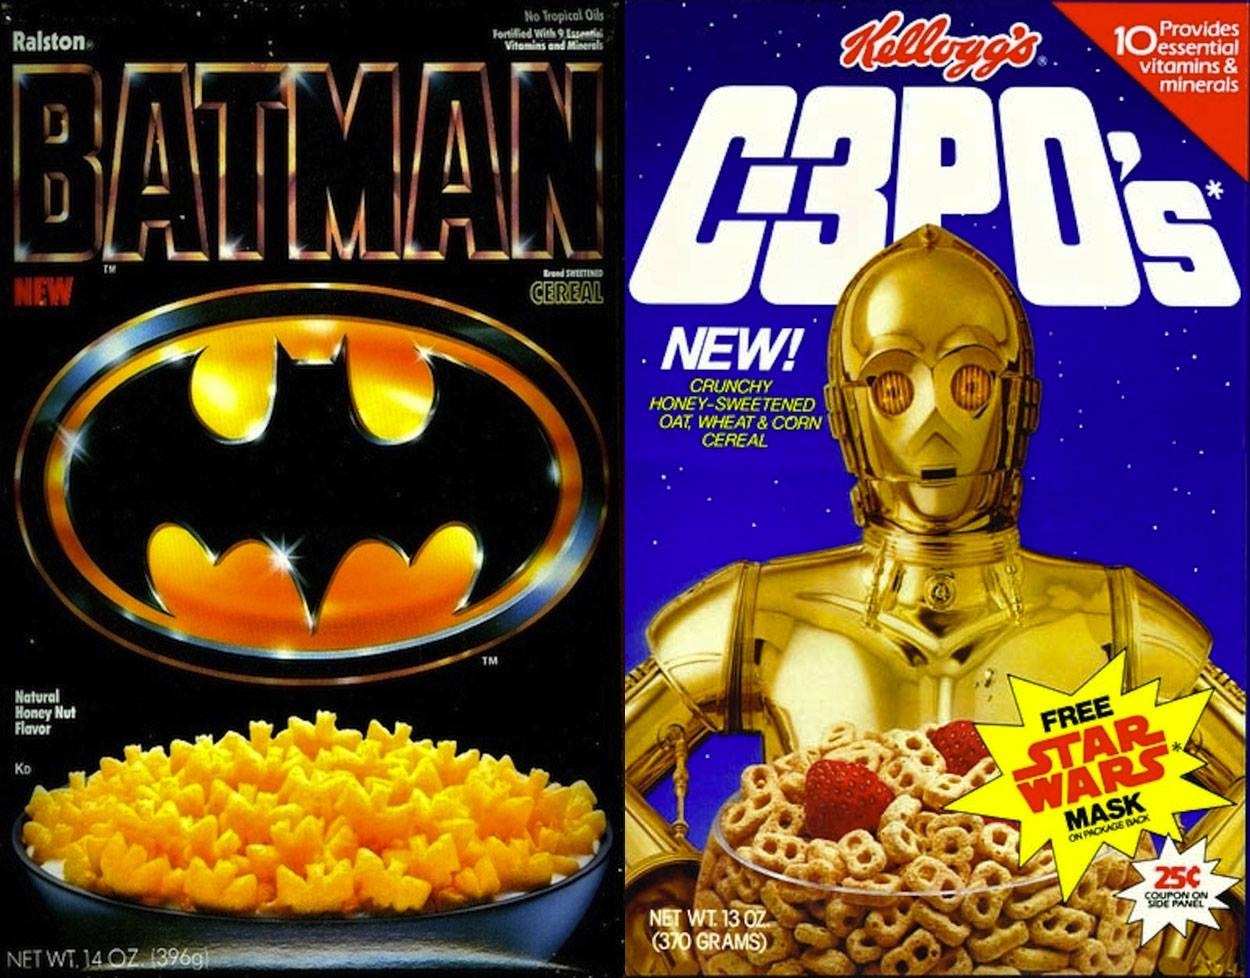 kellogg's star wars 80's - Ralston No Tropical Oils Tonified Wide 9 Essentie Vitamins and Minerals Kelionas Provides Dessential vitamins & minerals Batman Gepos Brand Sheitenes Cereal New! Crunchy HoneySweetened Oat Wheat & Corn Cereal Natural Honey Nut F